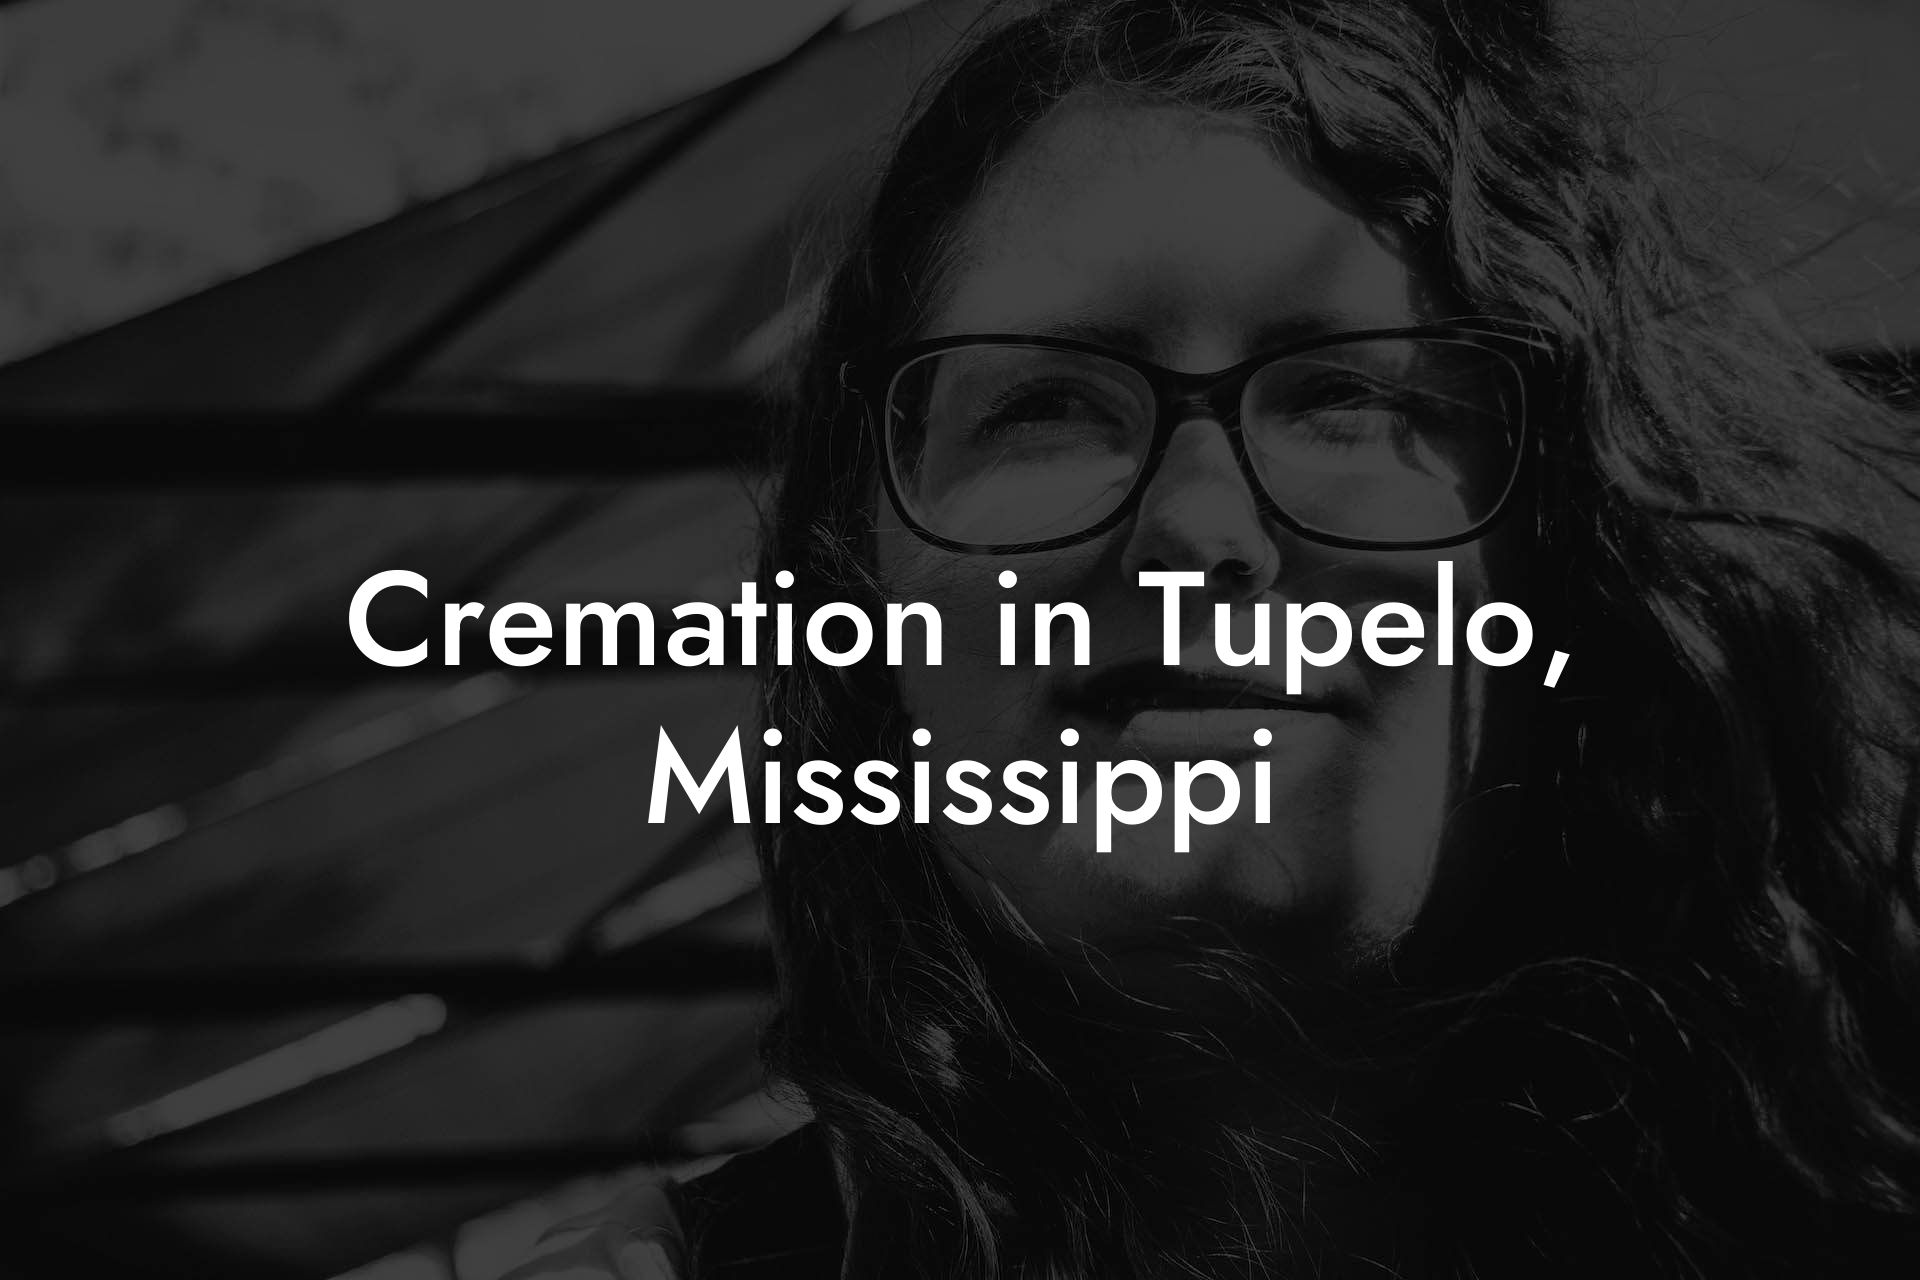 Cremation in Tupelo, Mississippi